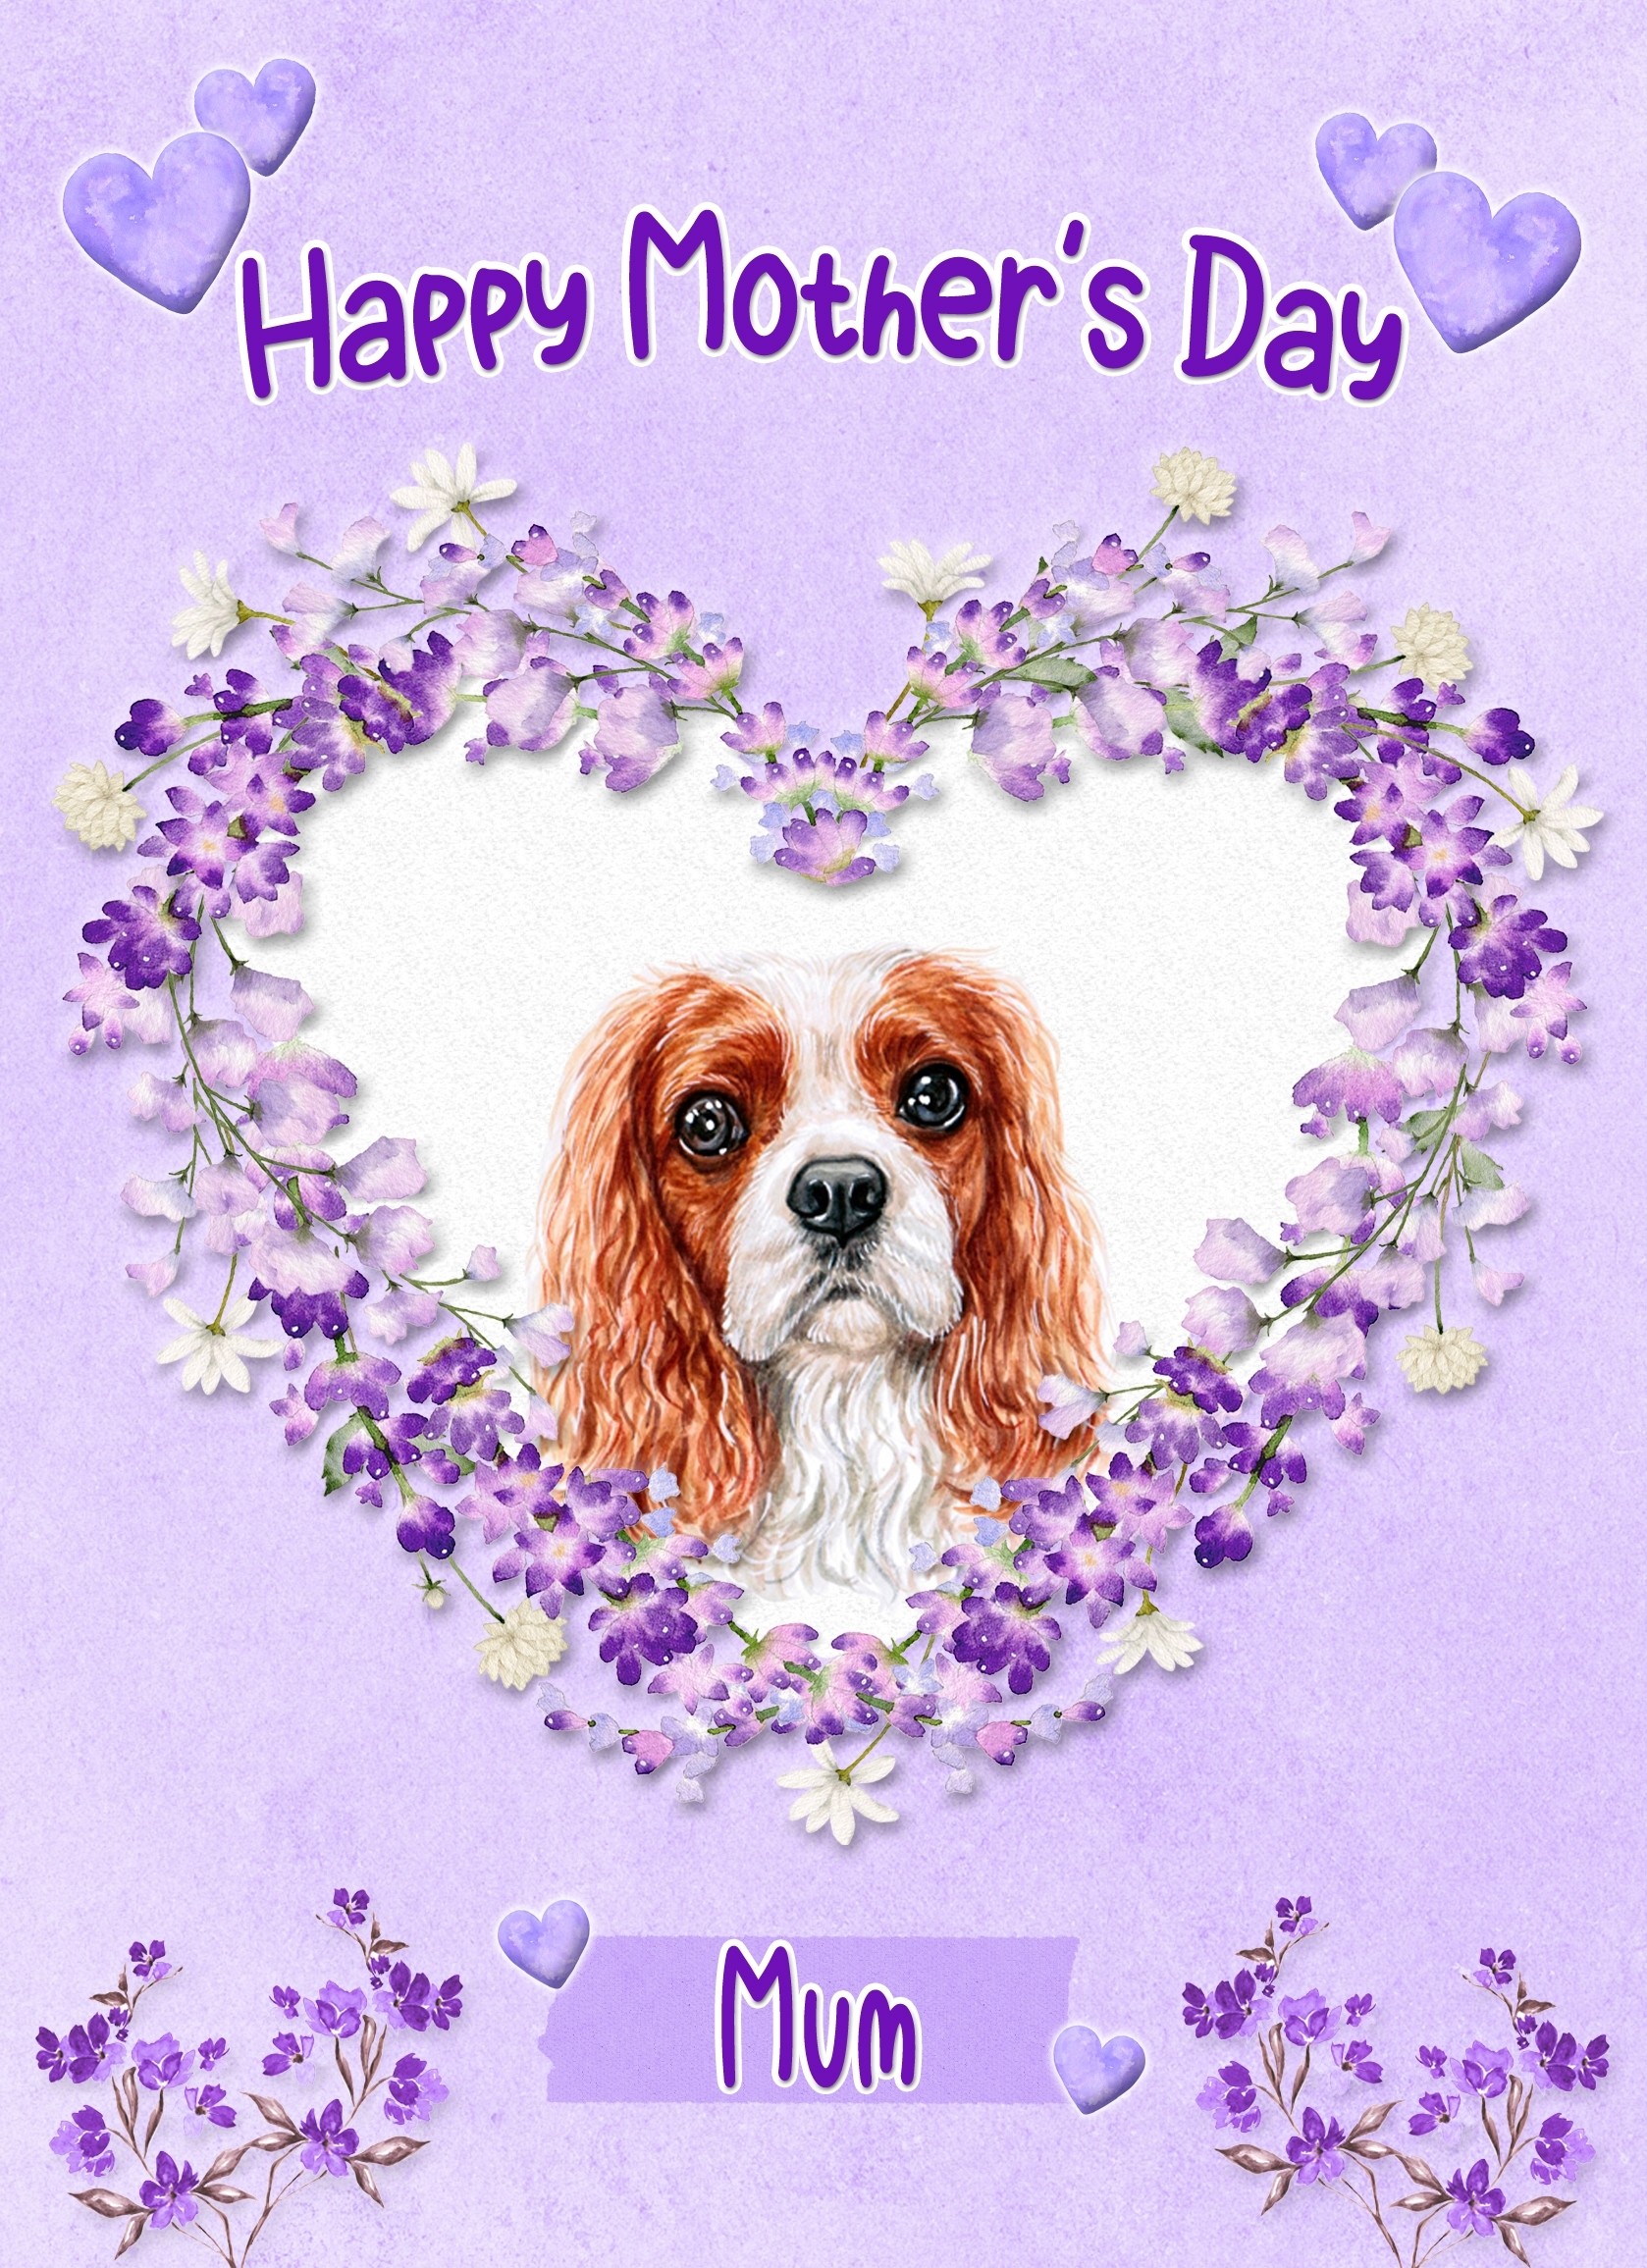 King Charles Spaniel Dog Mothers Day Card (Happy Mothers, Mum)